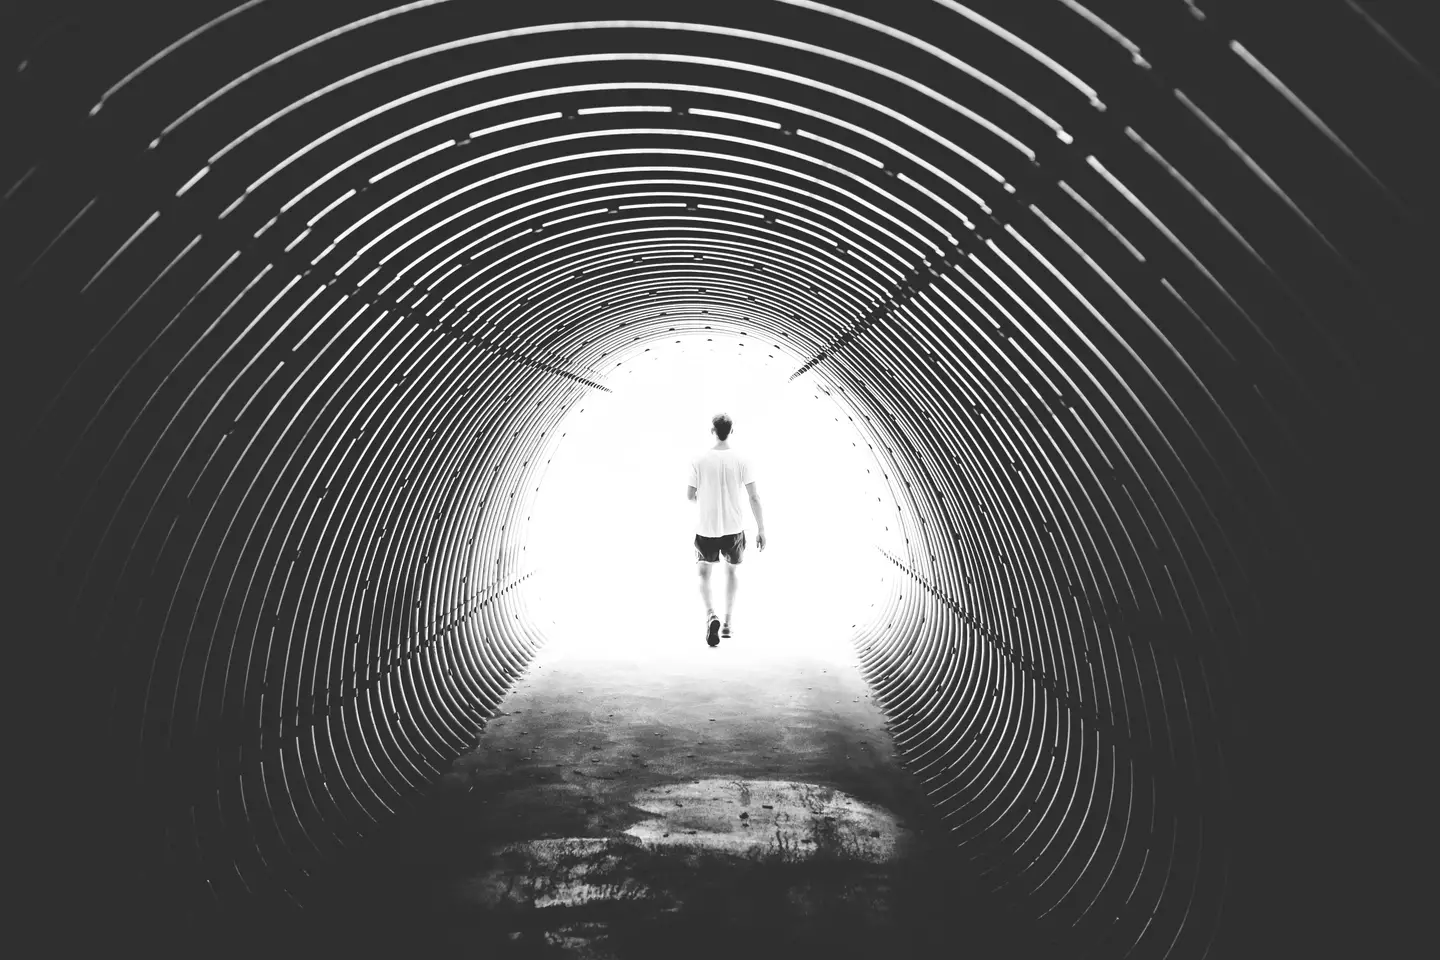 Many people who experience near death experiences see a tunnel of light.